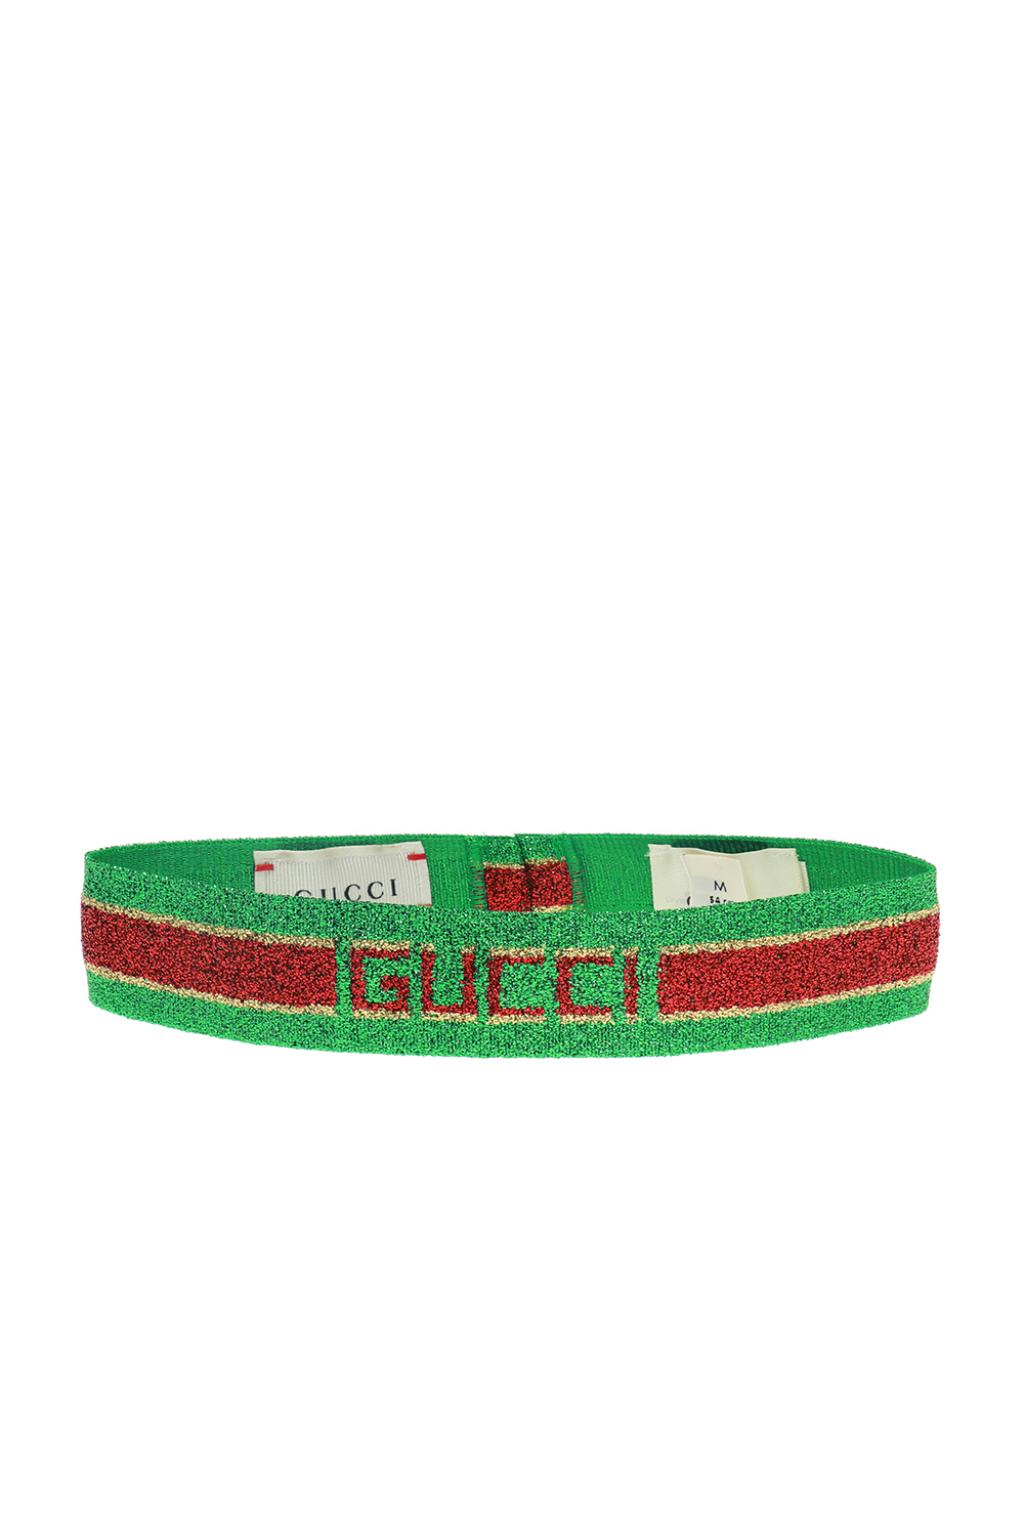 how much does a gucci headband cost